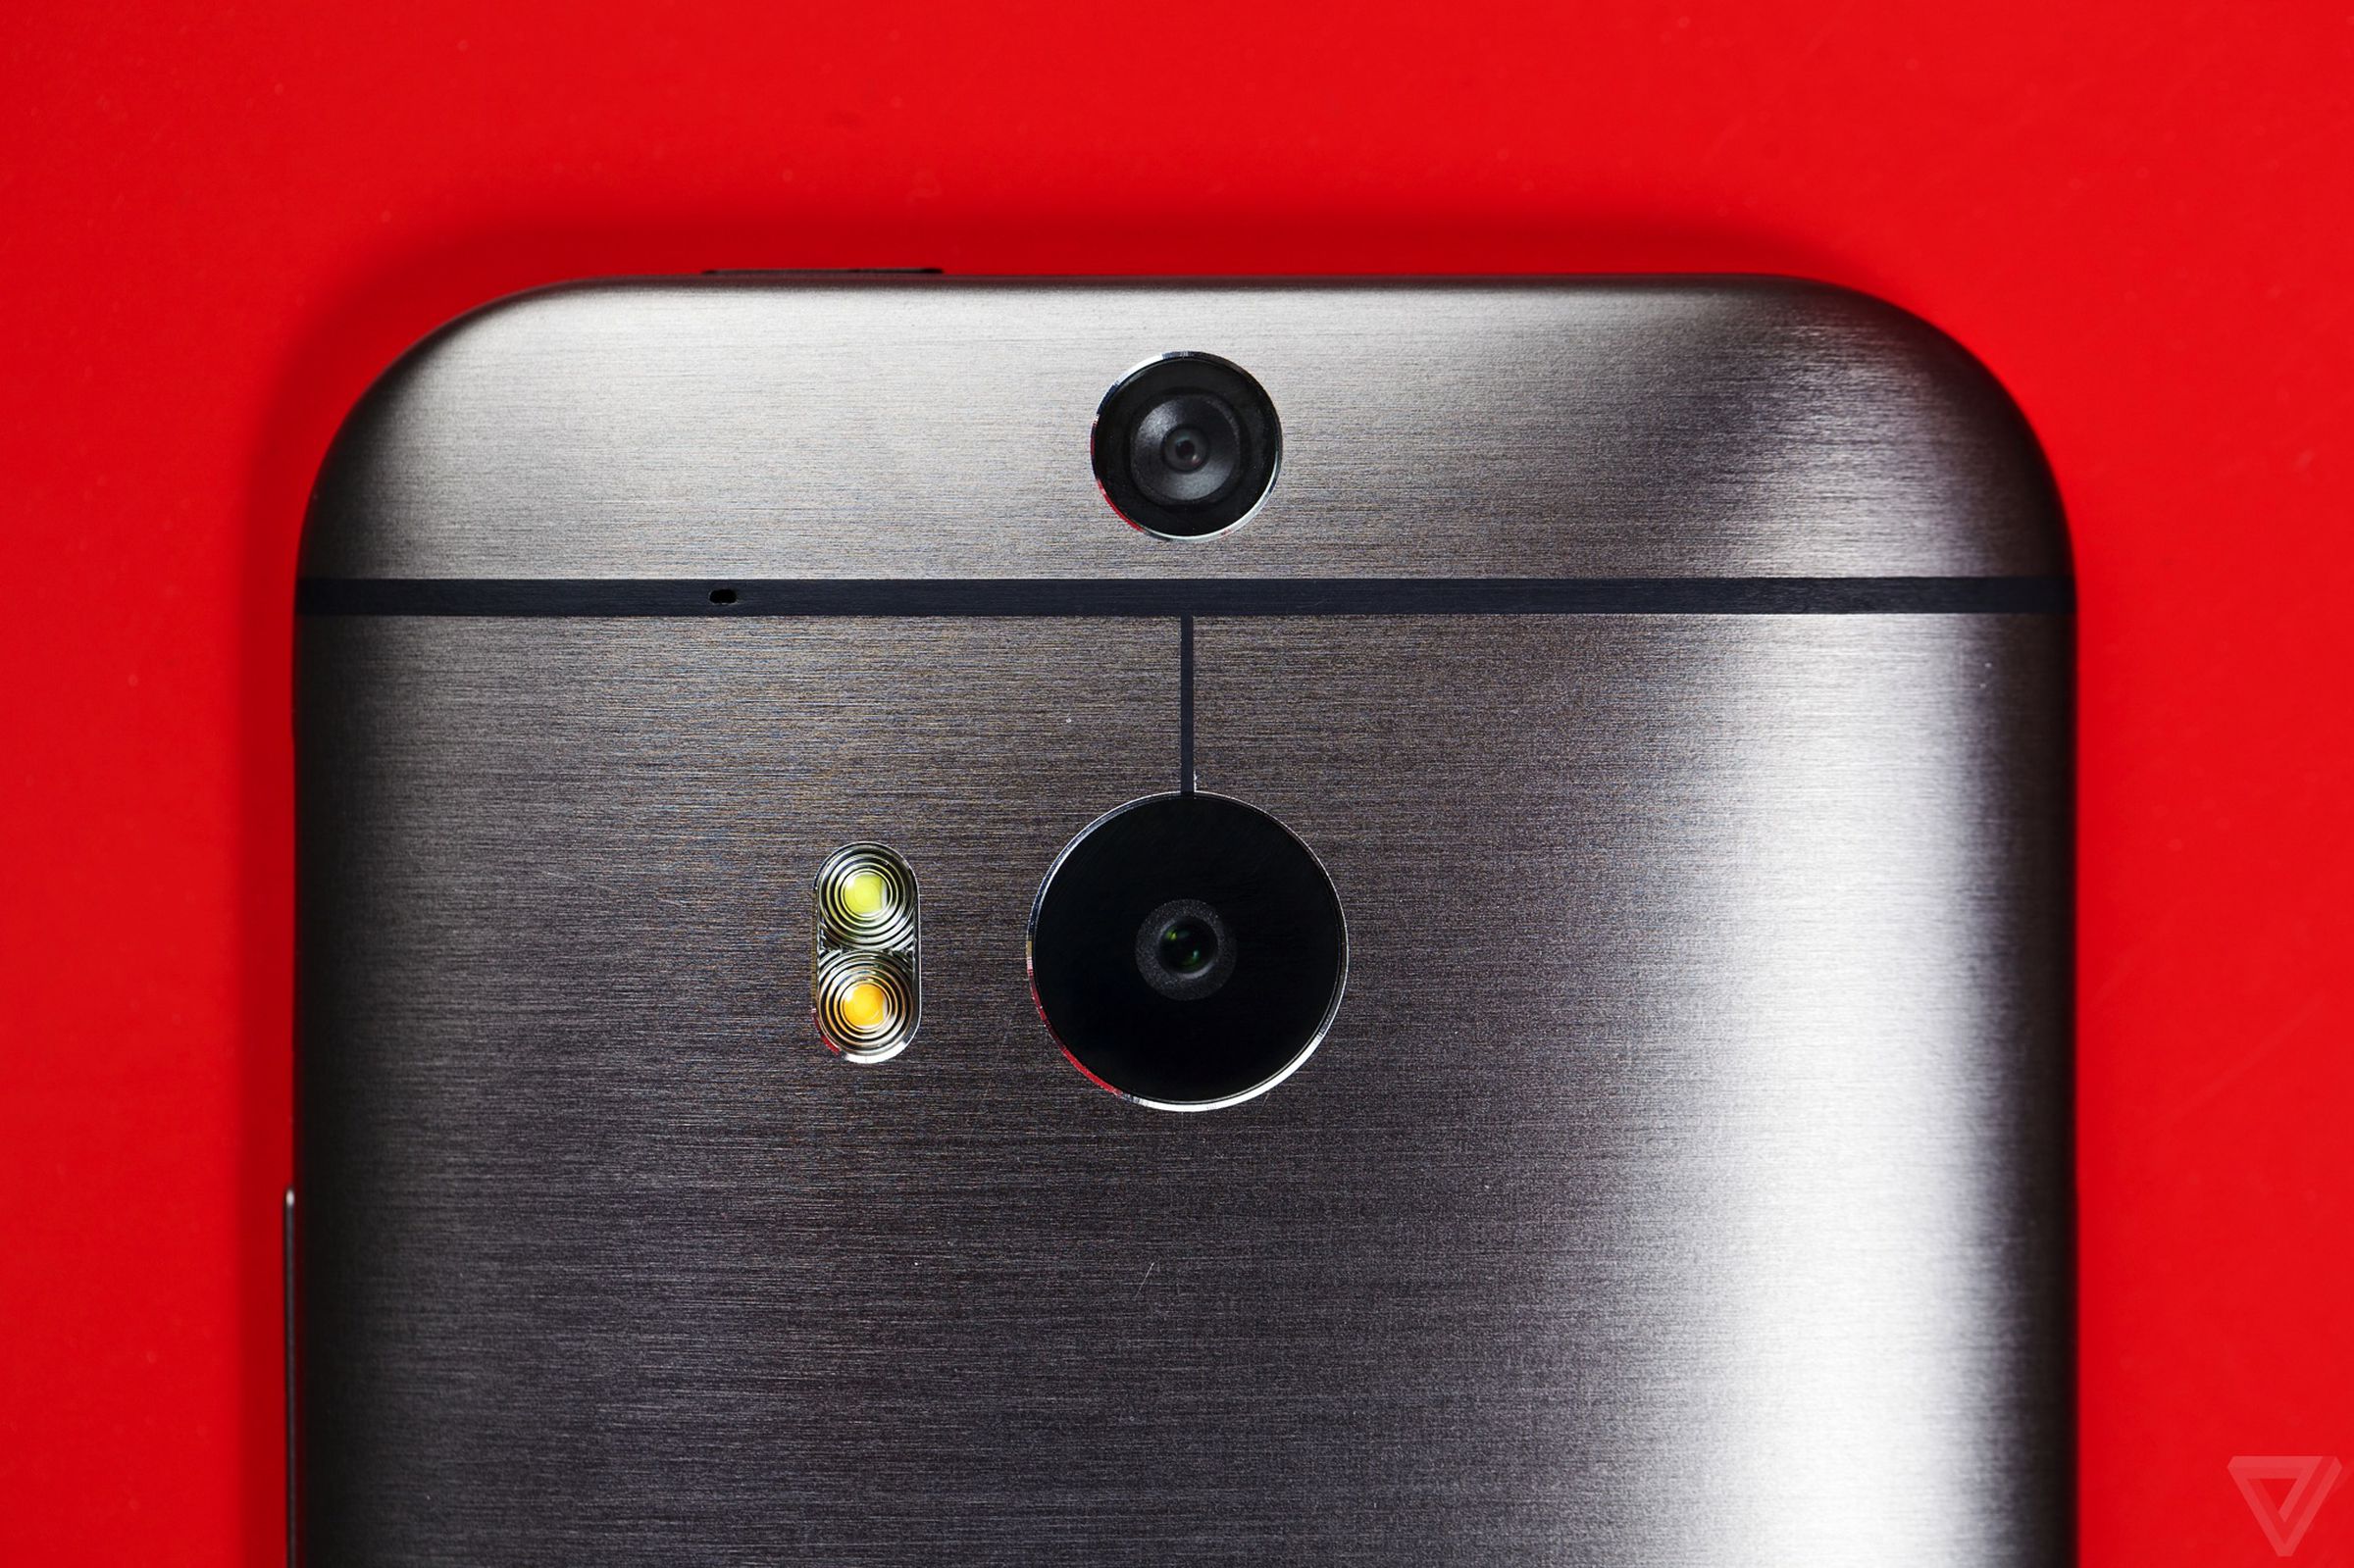 HTC One (M8) pictures